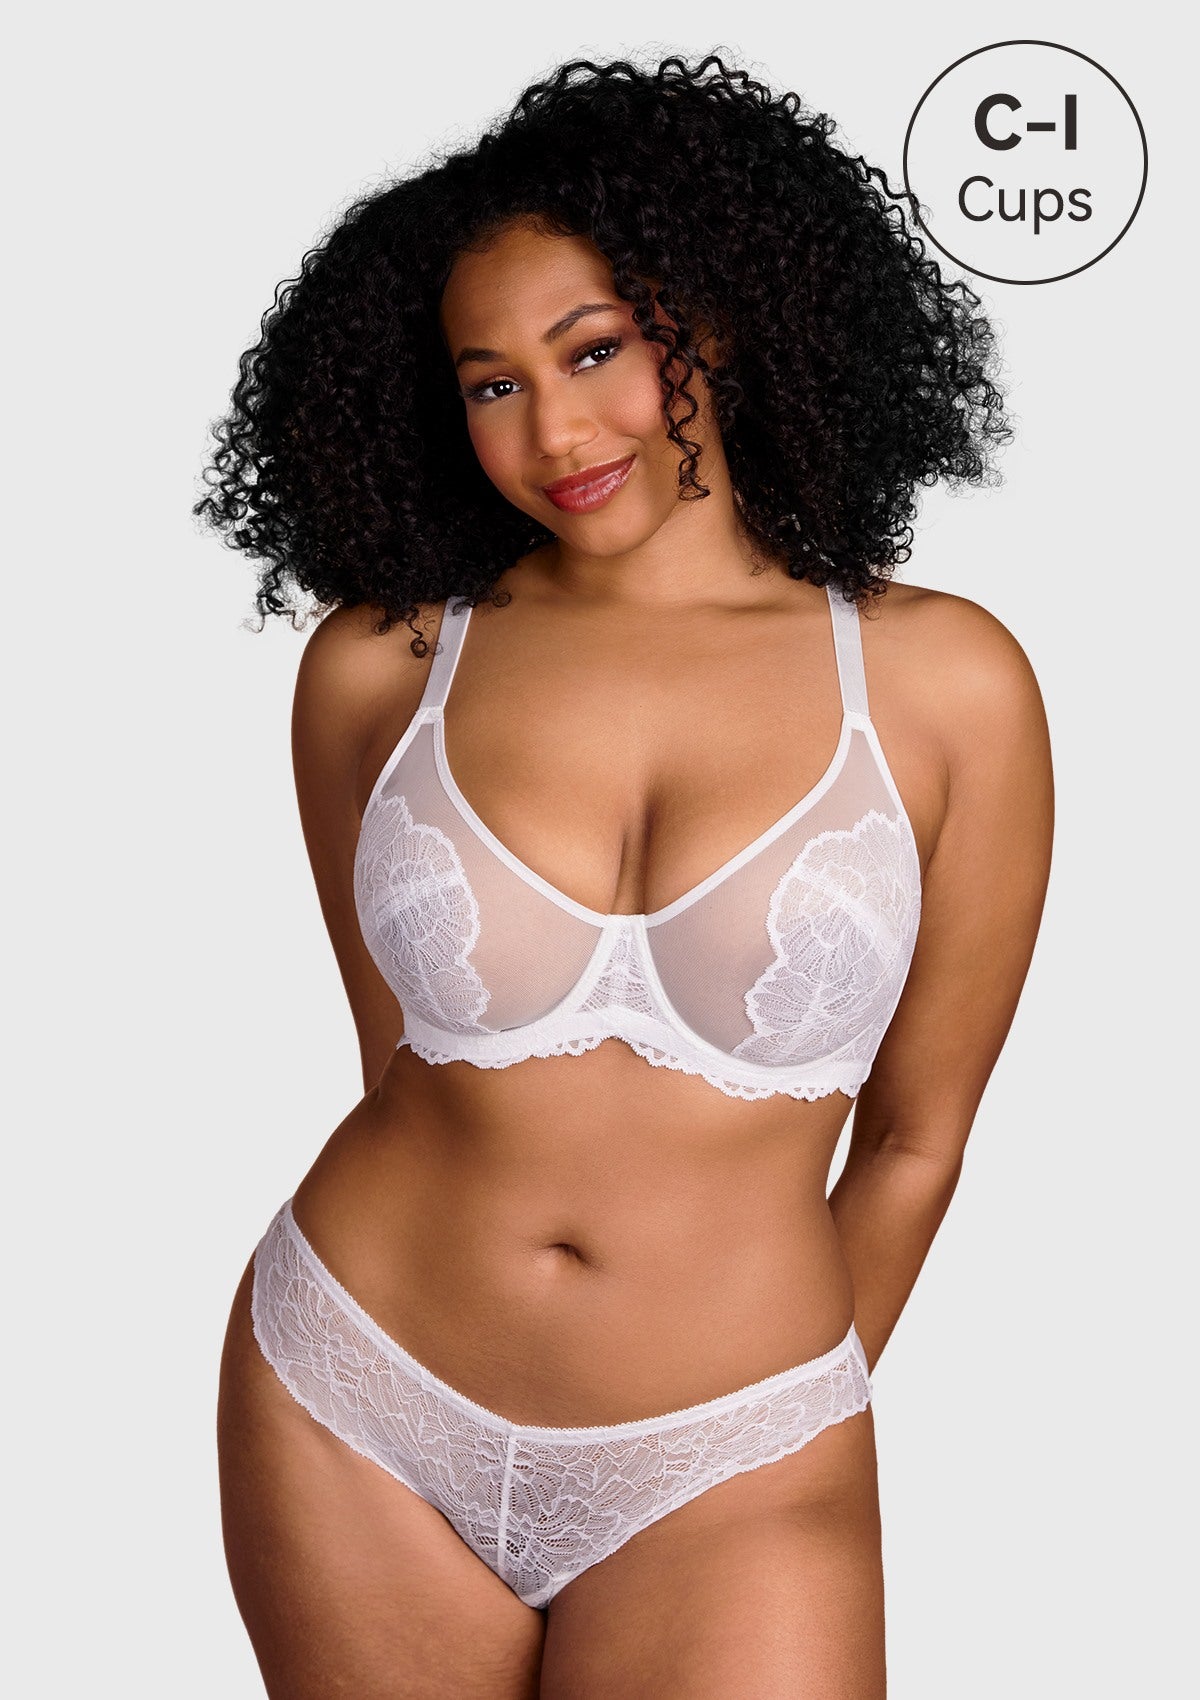 HSIA Blossom Bestseller Unlined Underwire Lace Bra - White / 40 / I